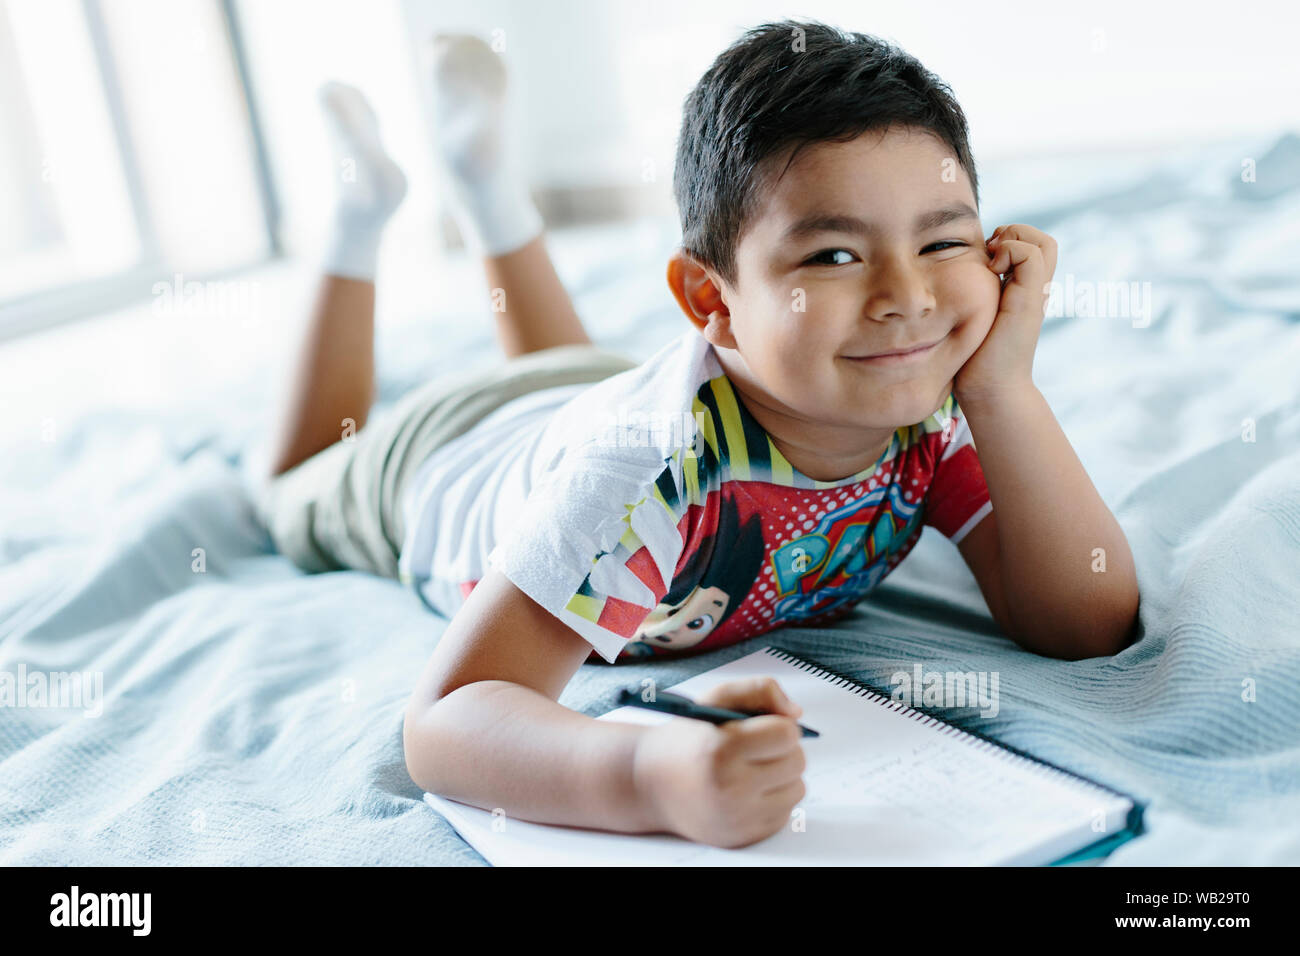 A 5-year old boy is lying on a blanket on bed. He's looking at the camera. He has hispanic ethnicity features. He's smiling. He has a cheeky or kind e Stock Photo